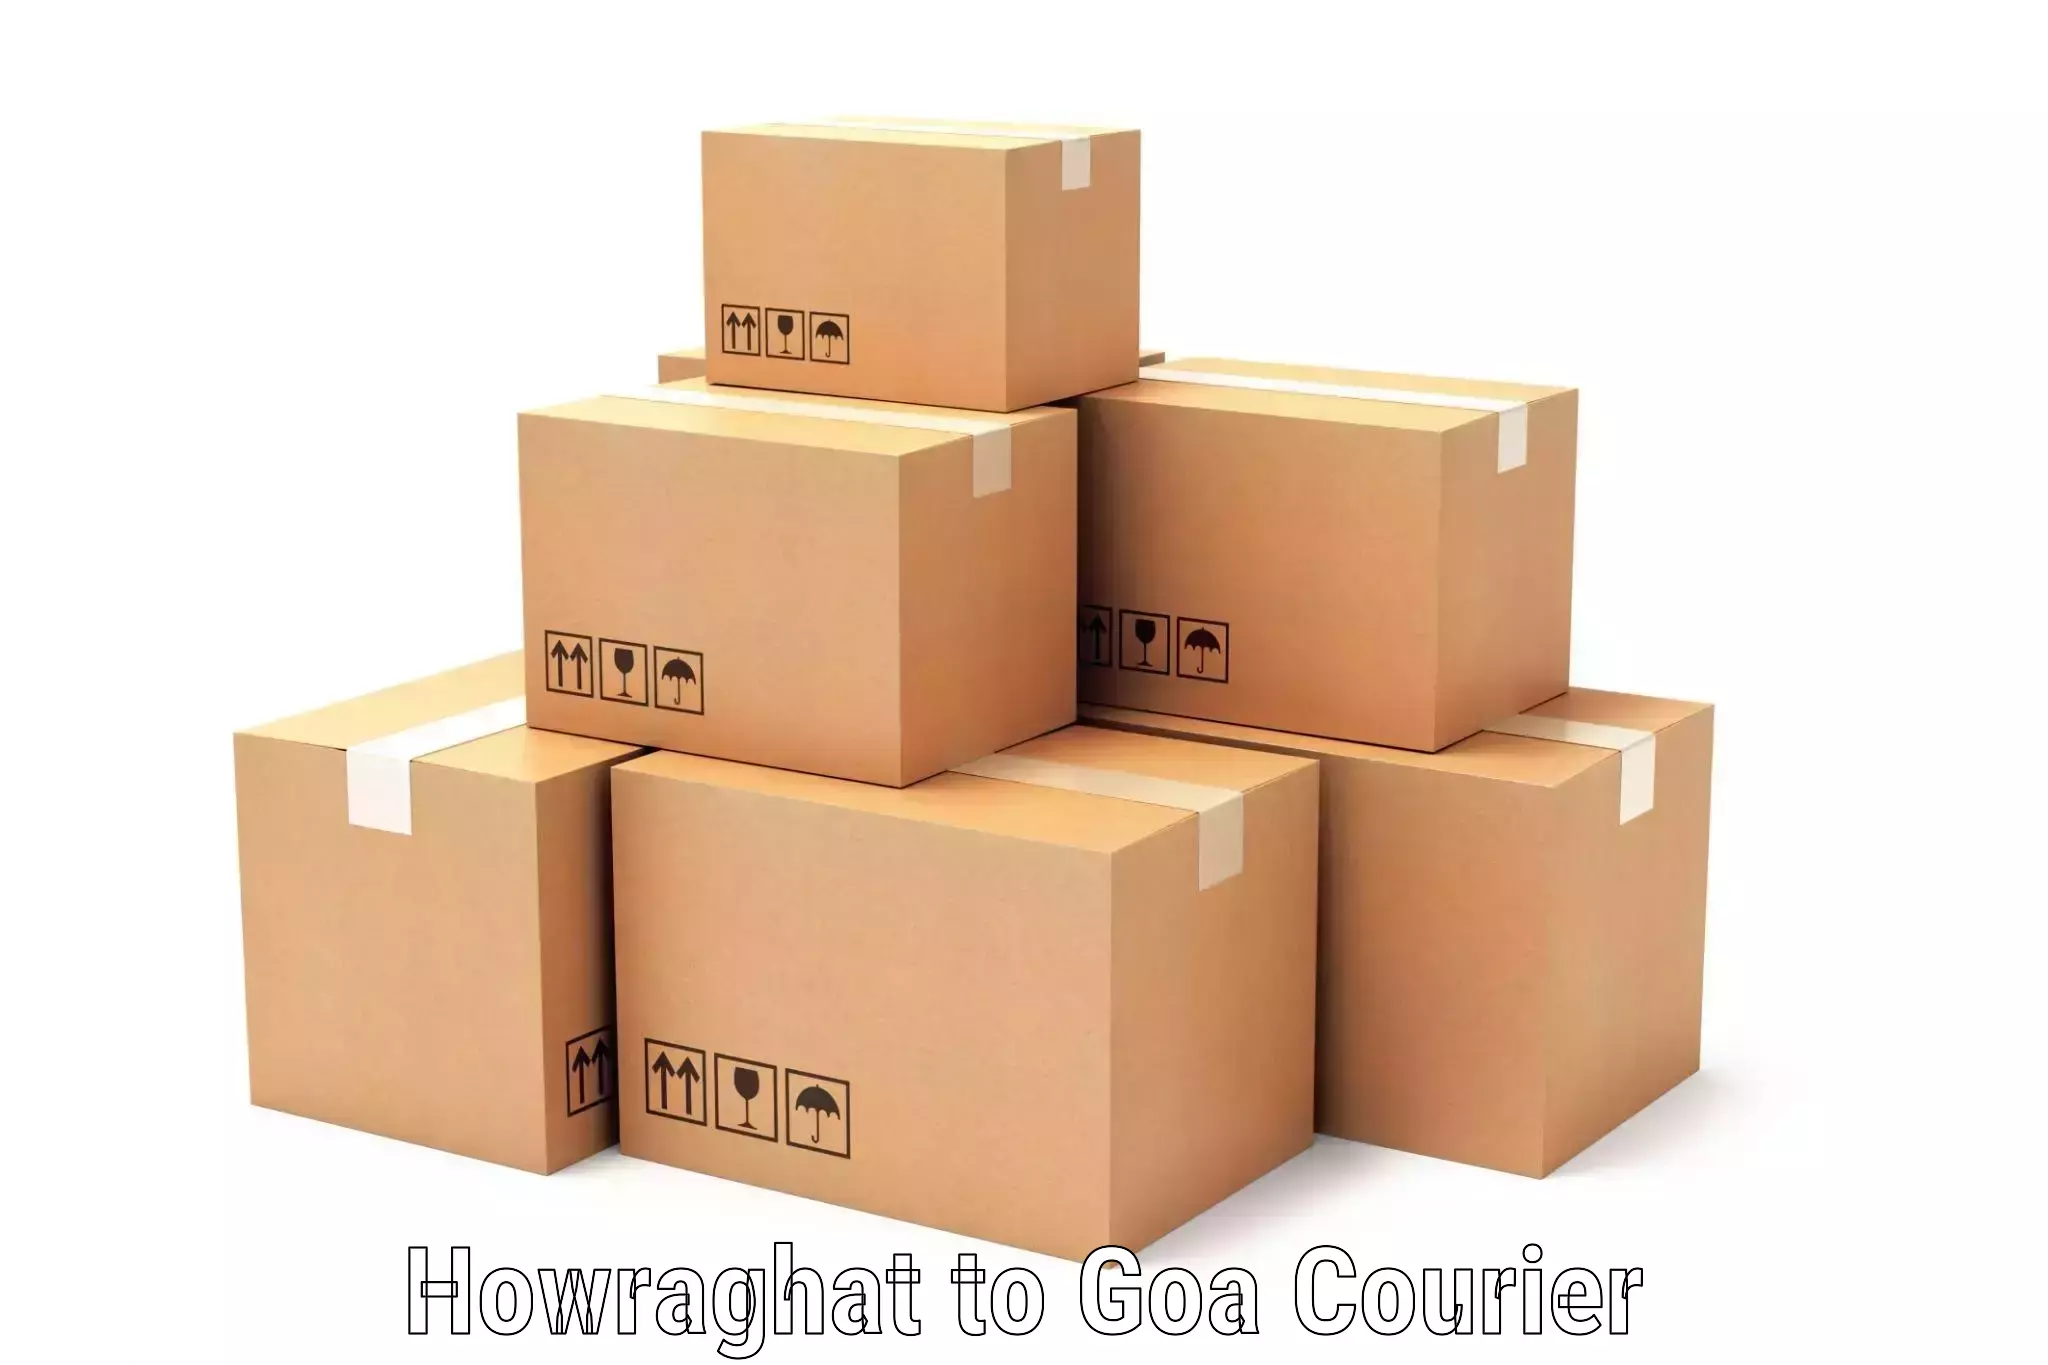 24/7 courier service Howraghat to Goa